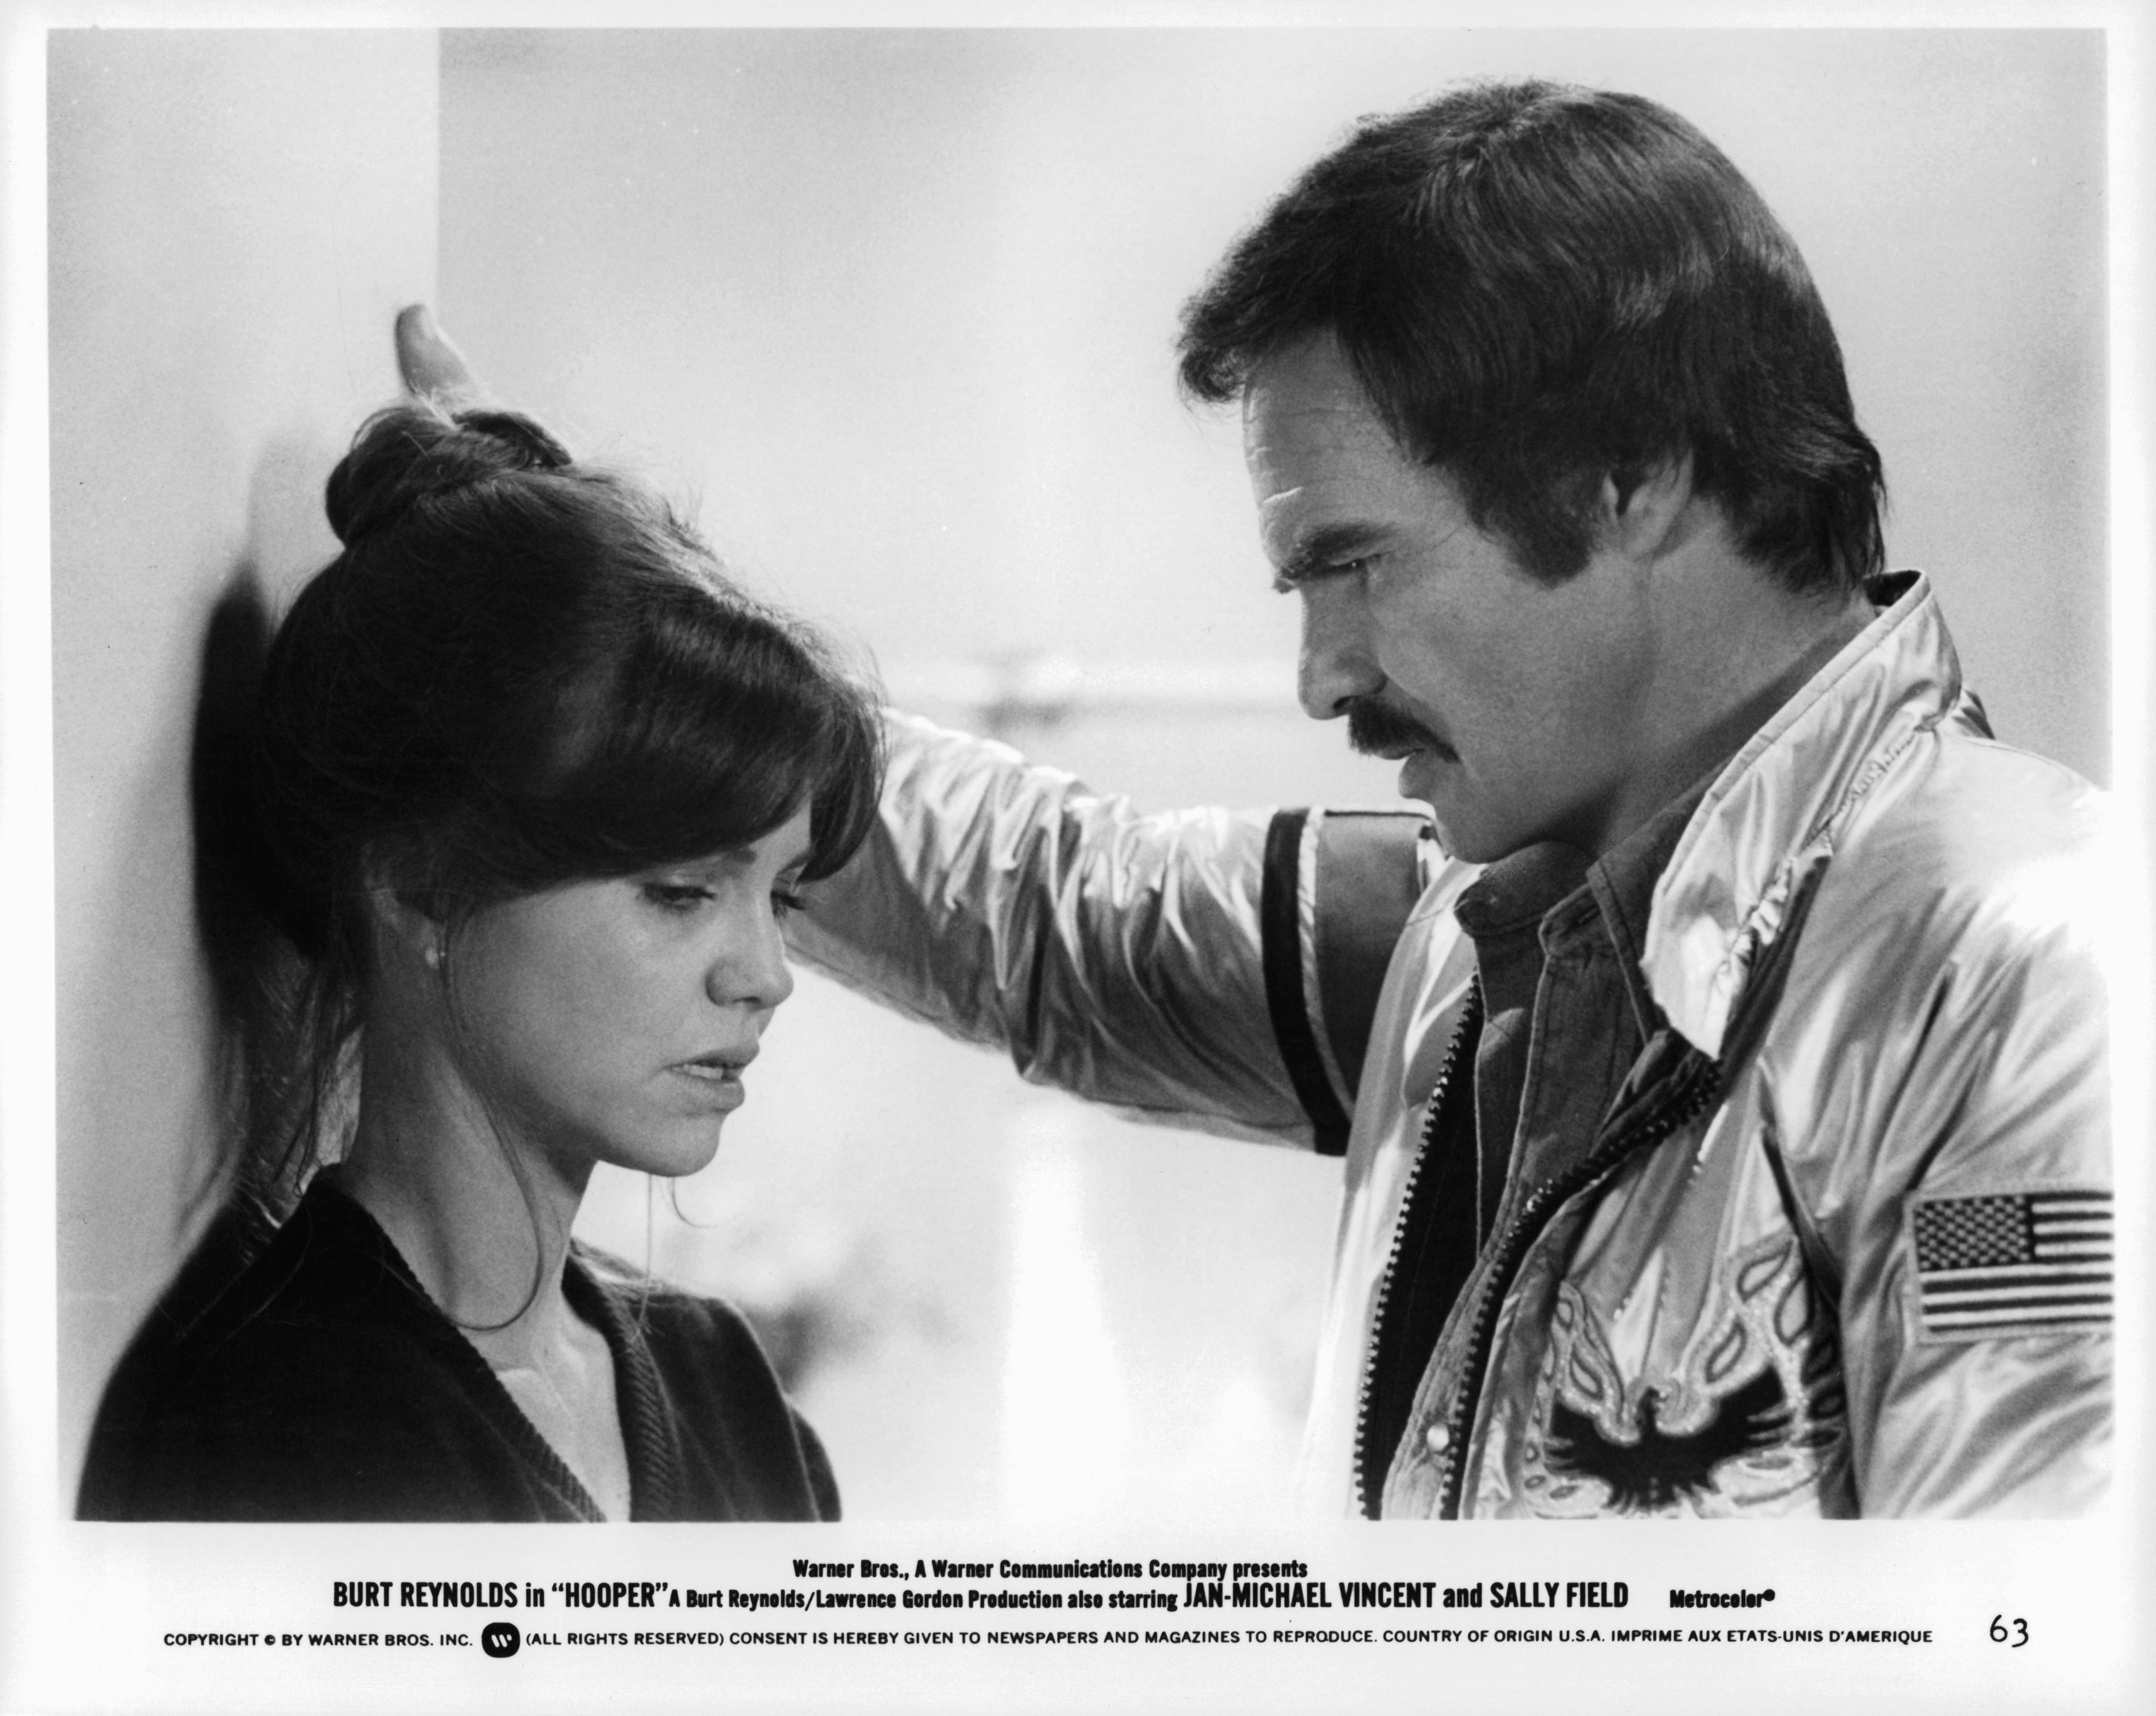 Sally Field as (Gwen Doyle) and Burt Reynolds as (Sonny Hooper) in the 1978 film "Hooper"┃Source: Getty Images